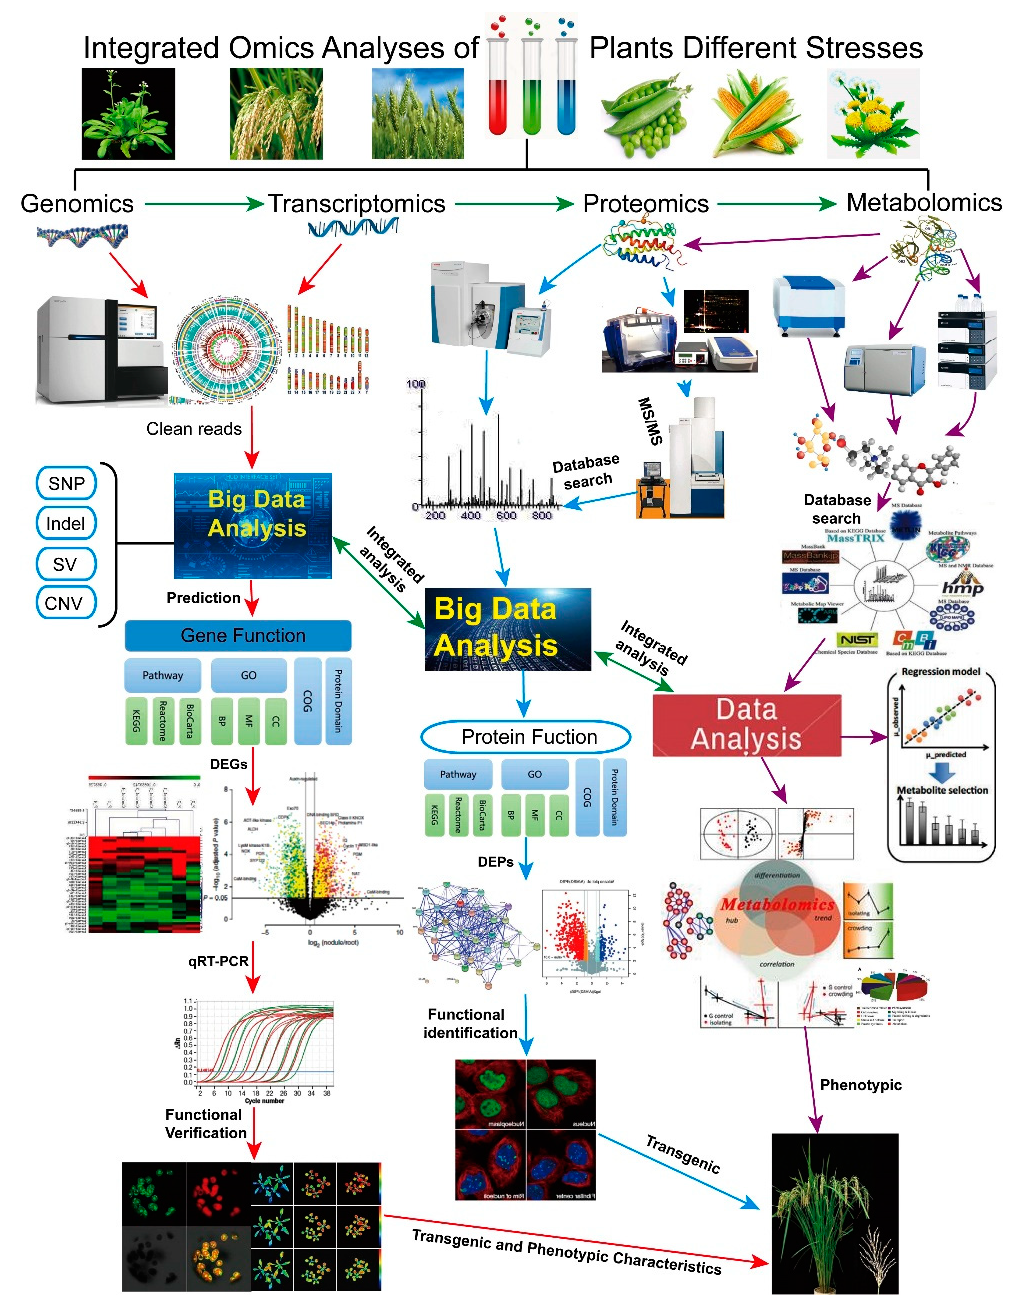 IJMS | Free Full-Text | Protein and Proteome Atlas for Plants under  Stresses: New Highlights and Ways for Integrated Omics in Post-Genomics Era  | HTML